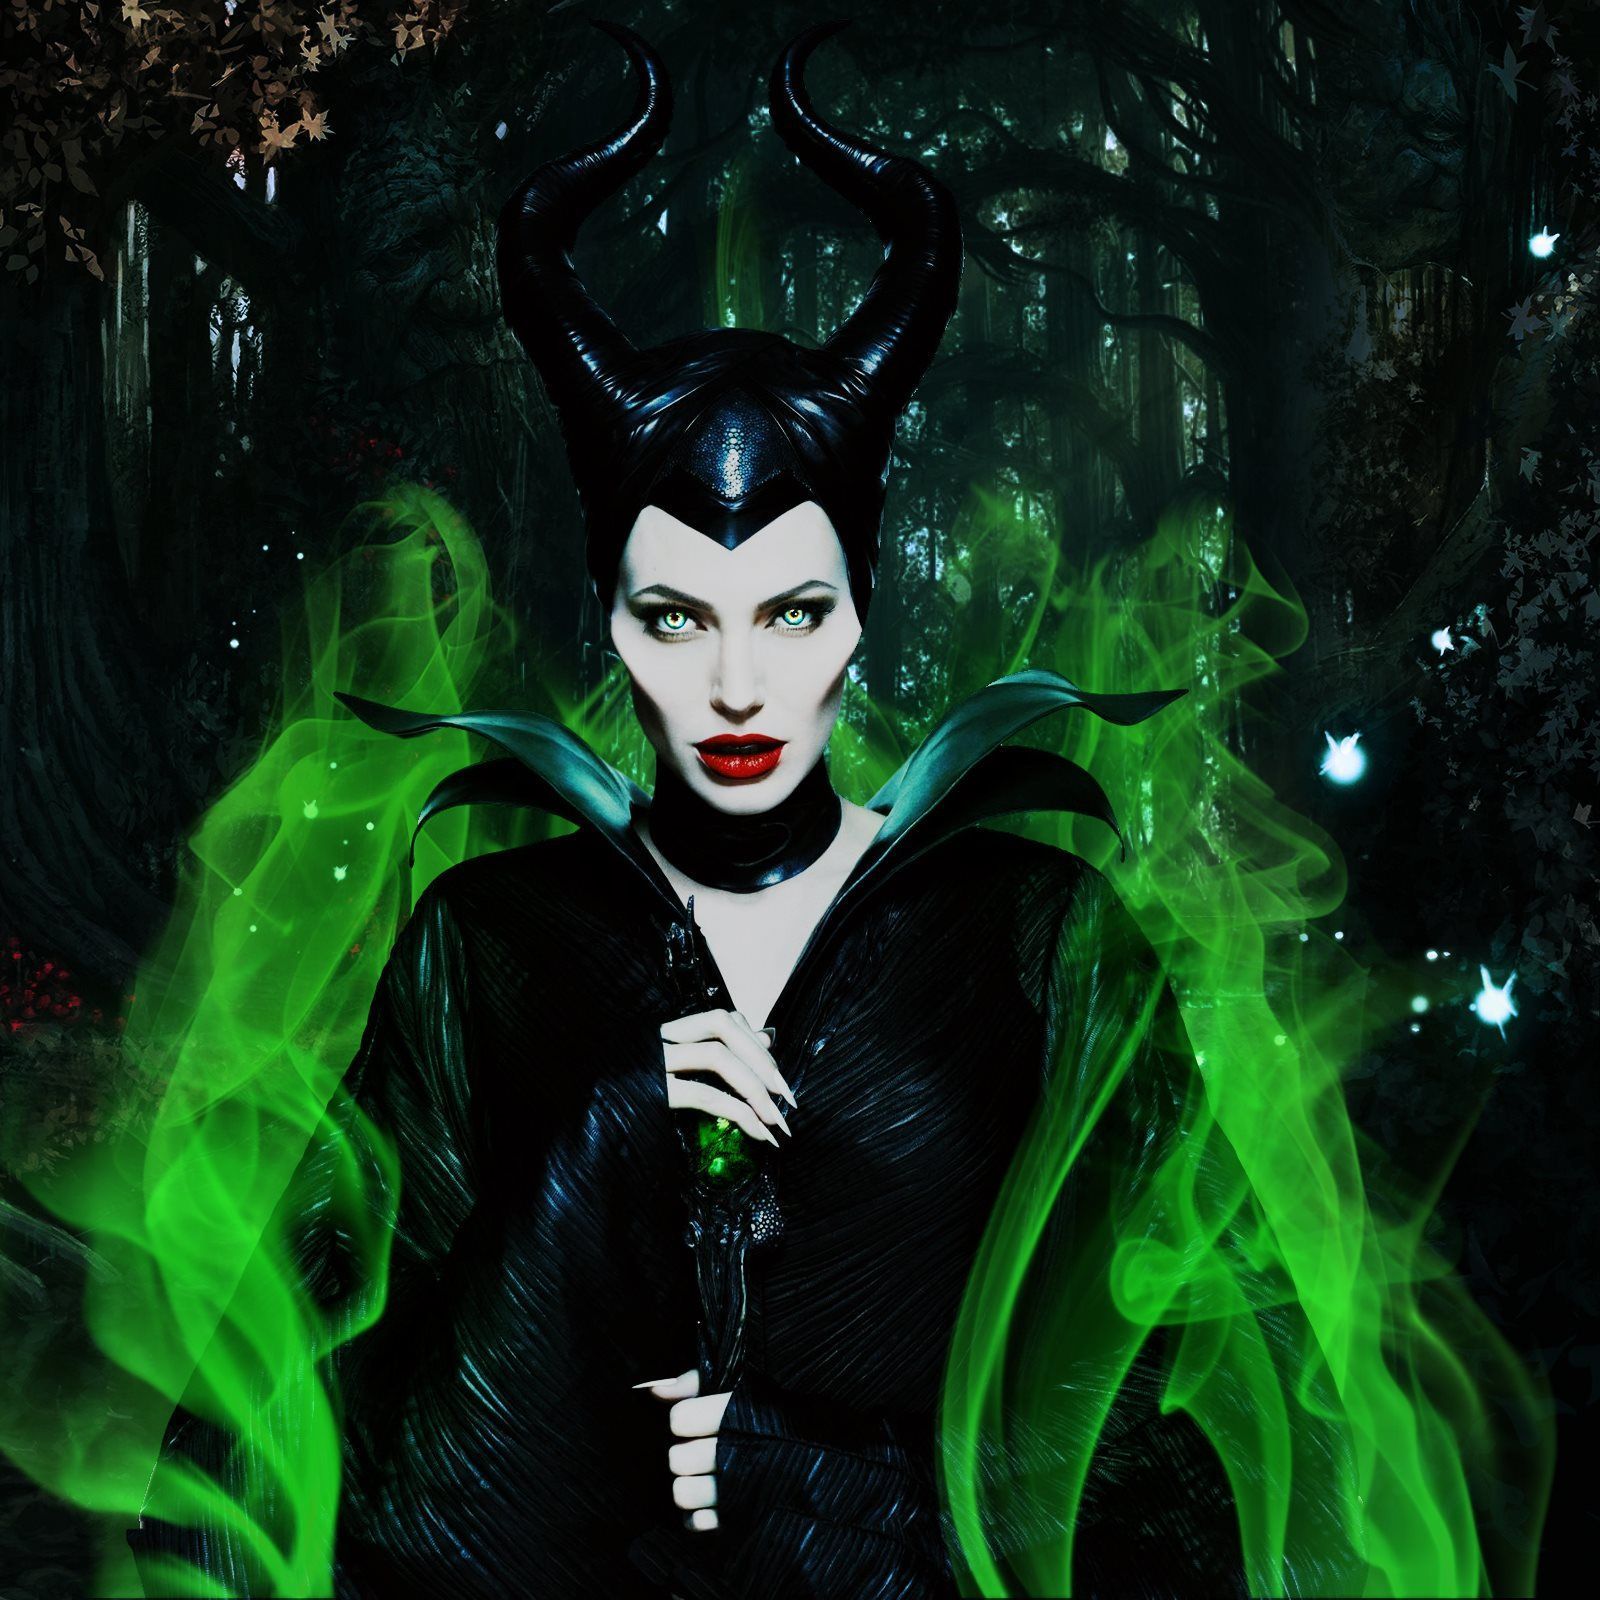 Maleficent Movie HD Wallpaper and Images, New Wallpapers